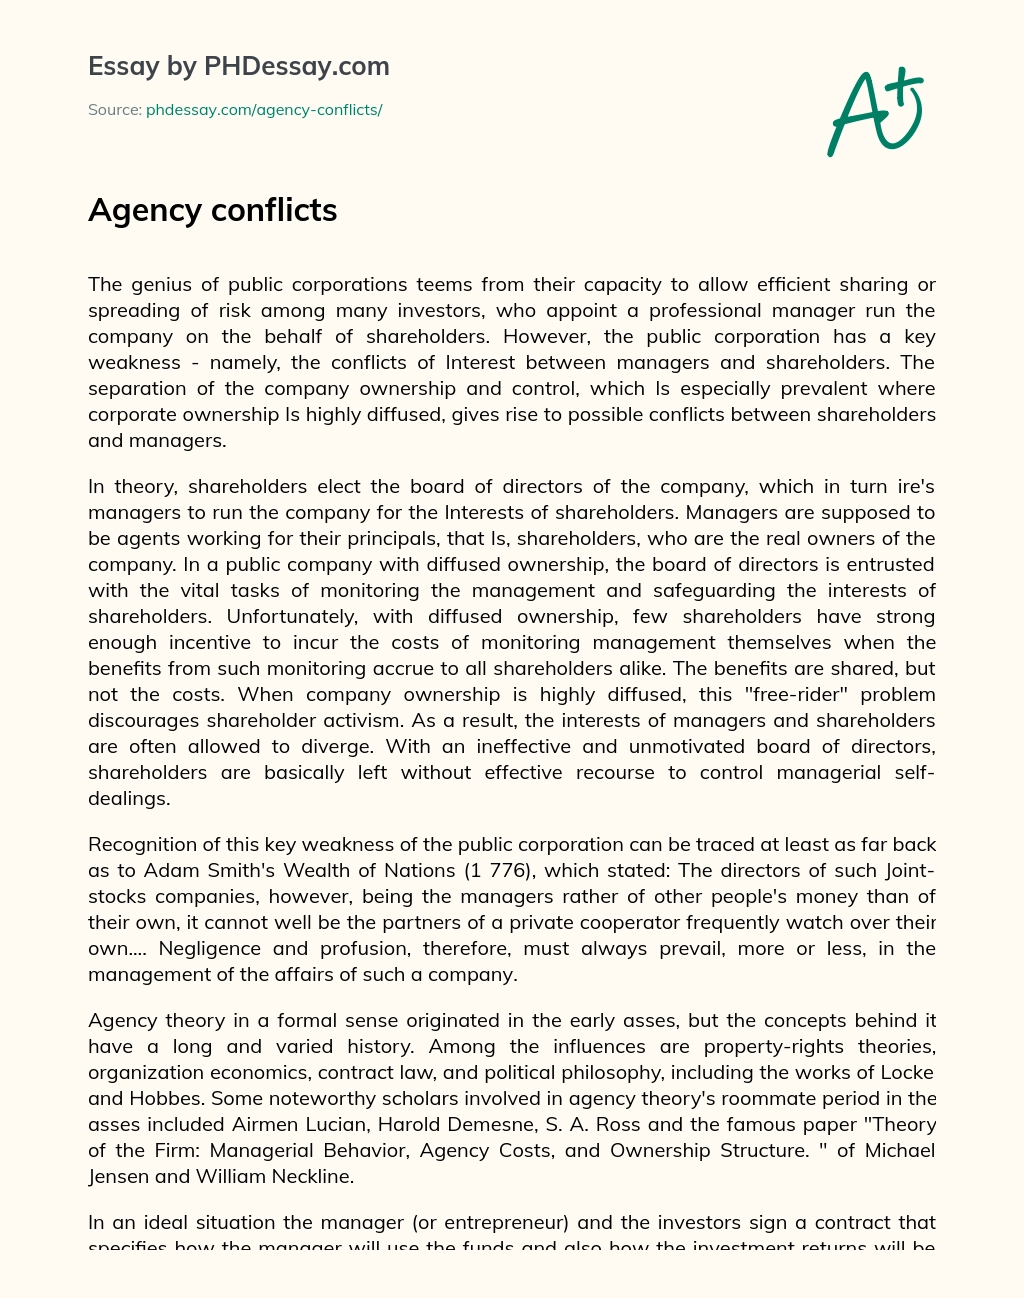 Agency conflicts essay